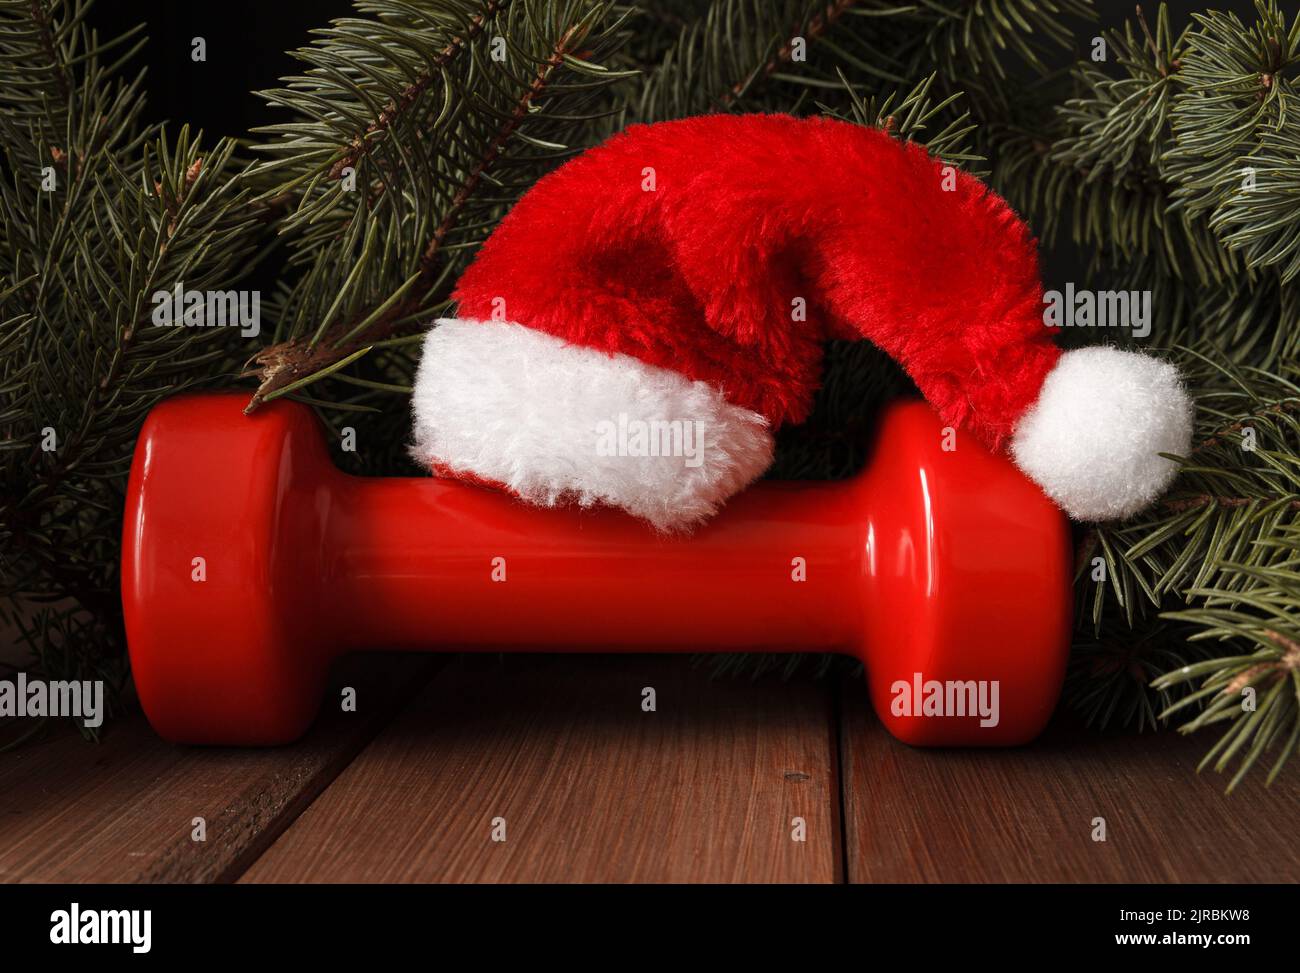 Red dumbbell with Santa Claus hat. Exercise equipment as Christmas gift idea. Gym fitness holiday season concept composition with tree branches. Stock Photo